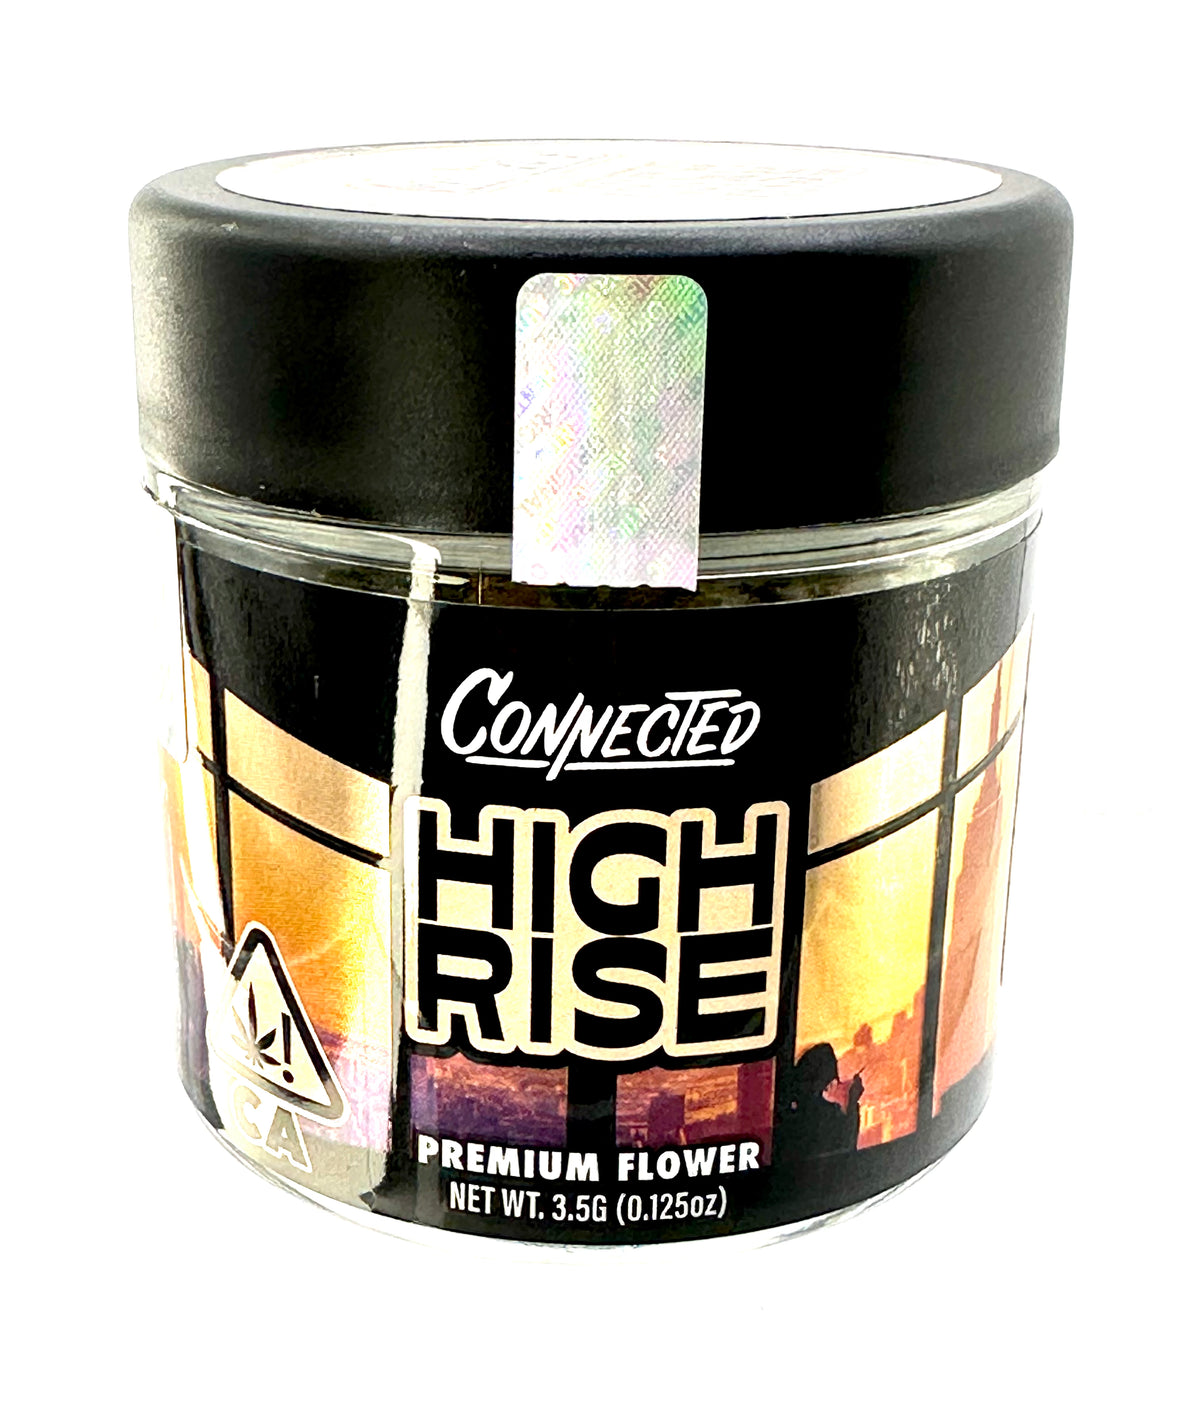 High Rise by Connected: Sativa Dominant